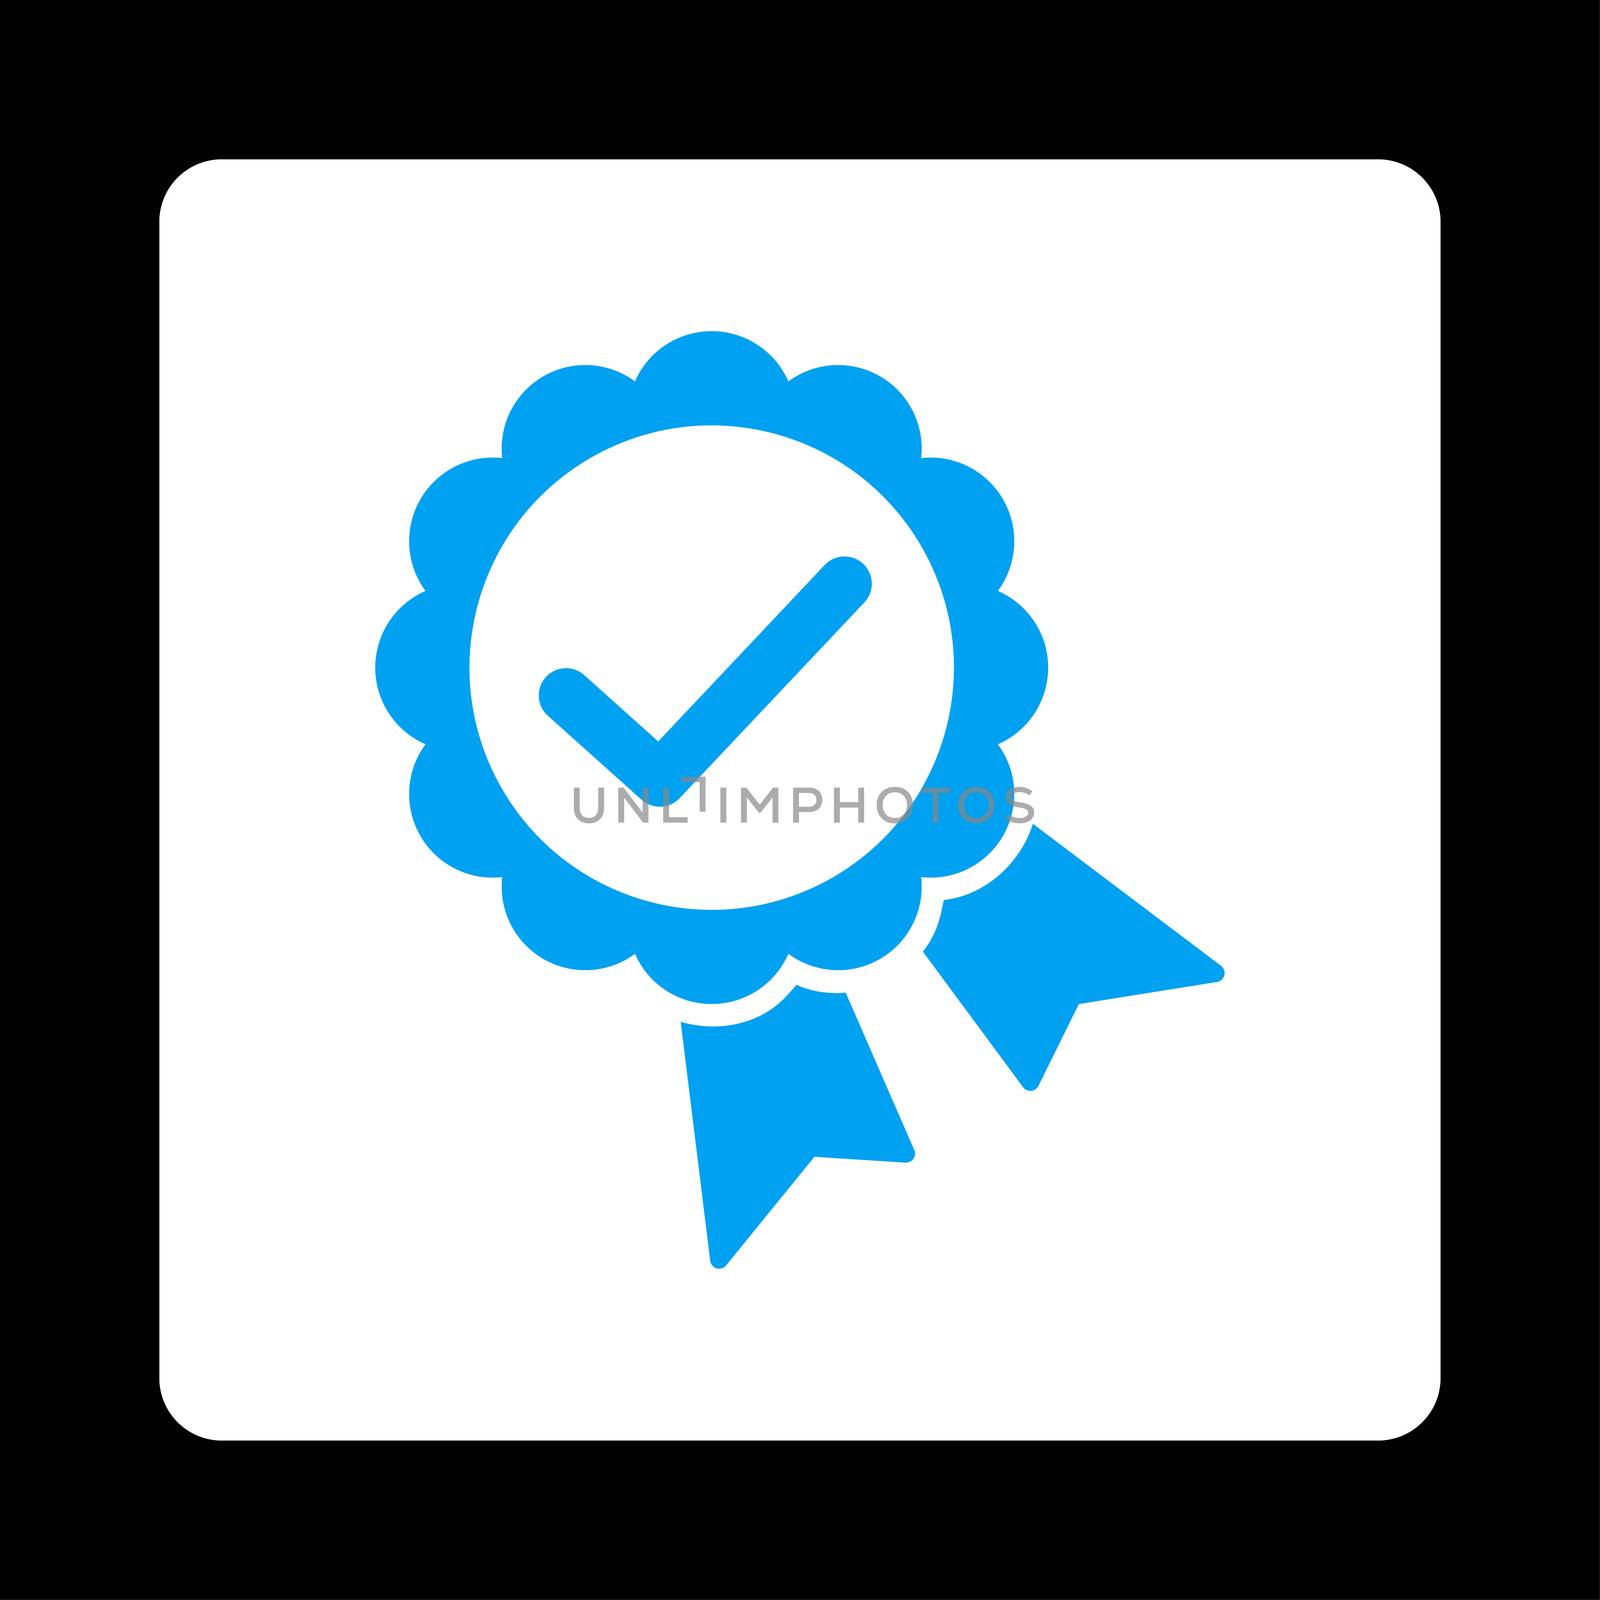 Approved icon from Award Buttons OverColor Set. Icon style is blue and white colors, flat rounded square button, black background.